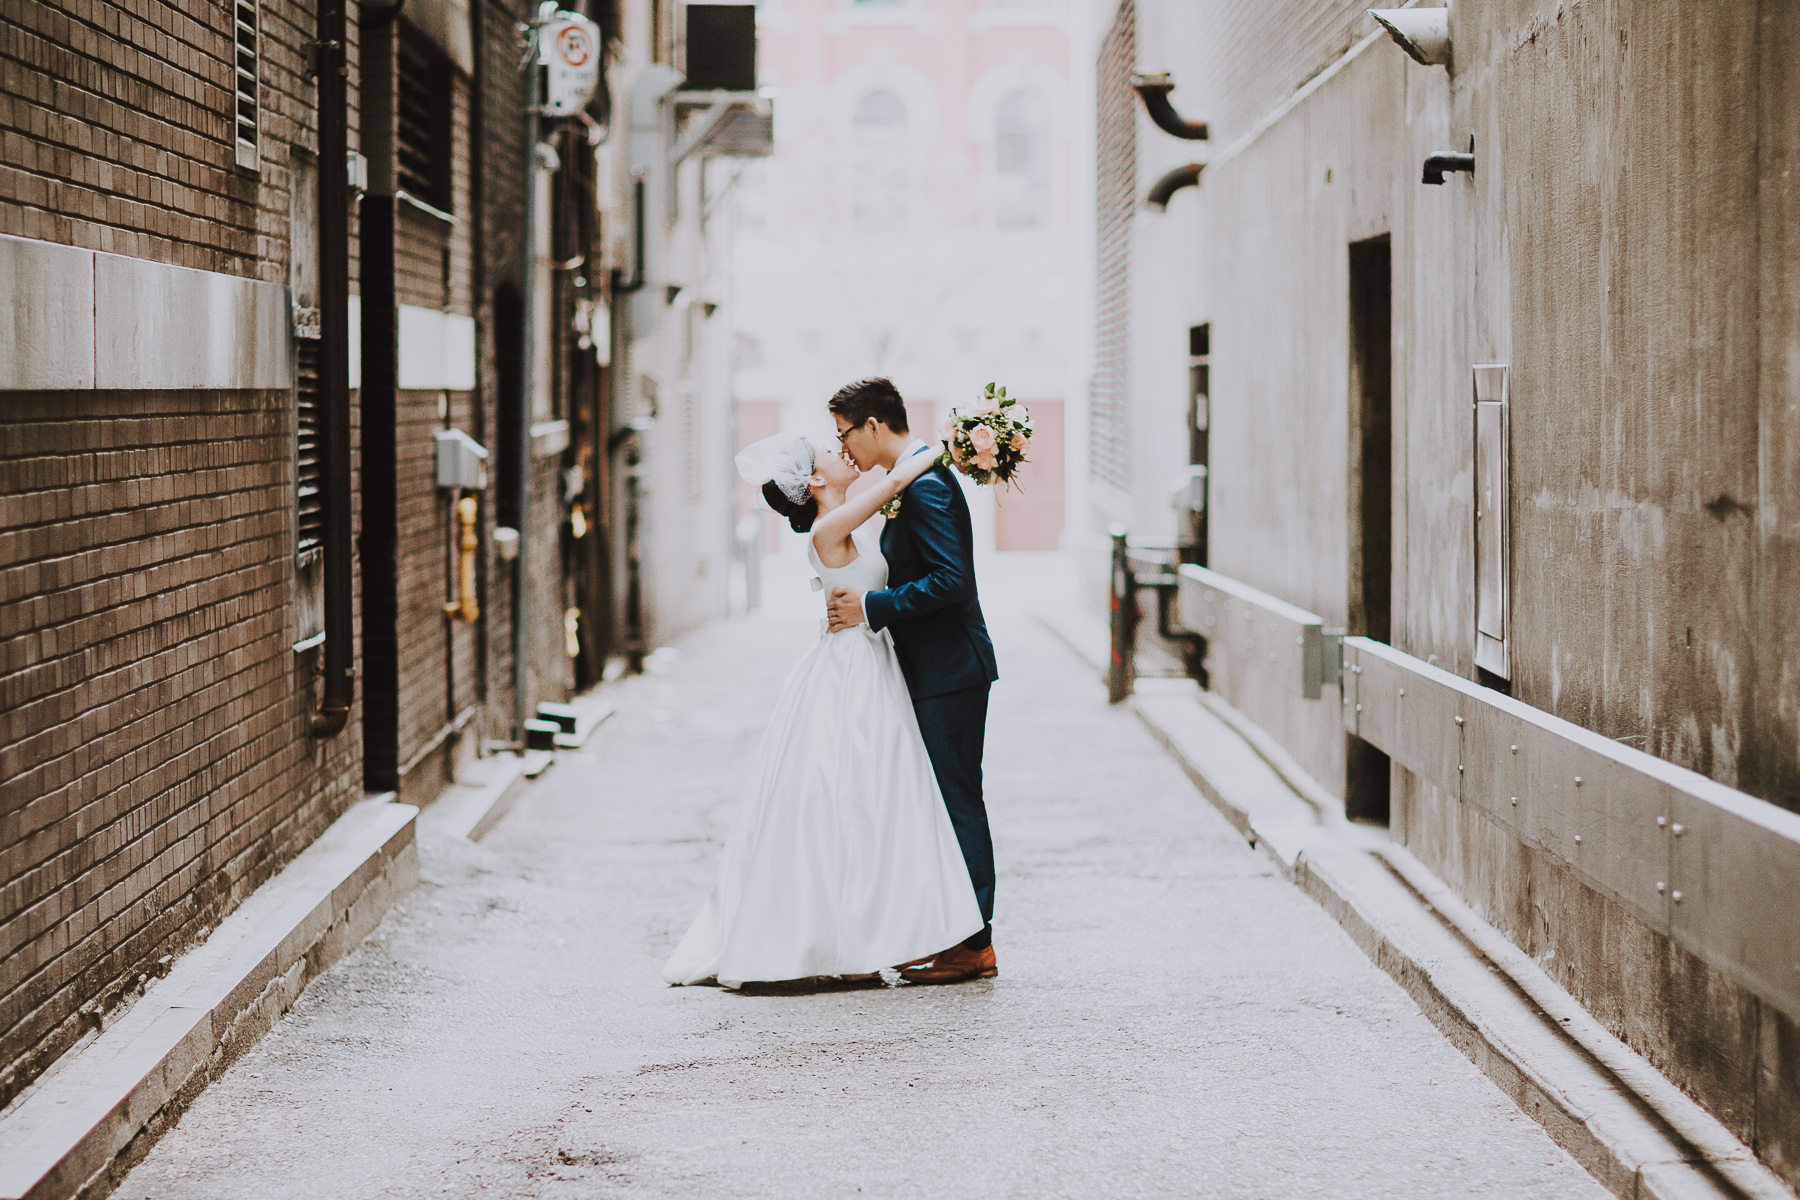 3 Tips to Dreamy Wedding Poses on Your Wedding Day